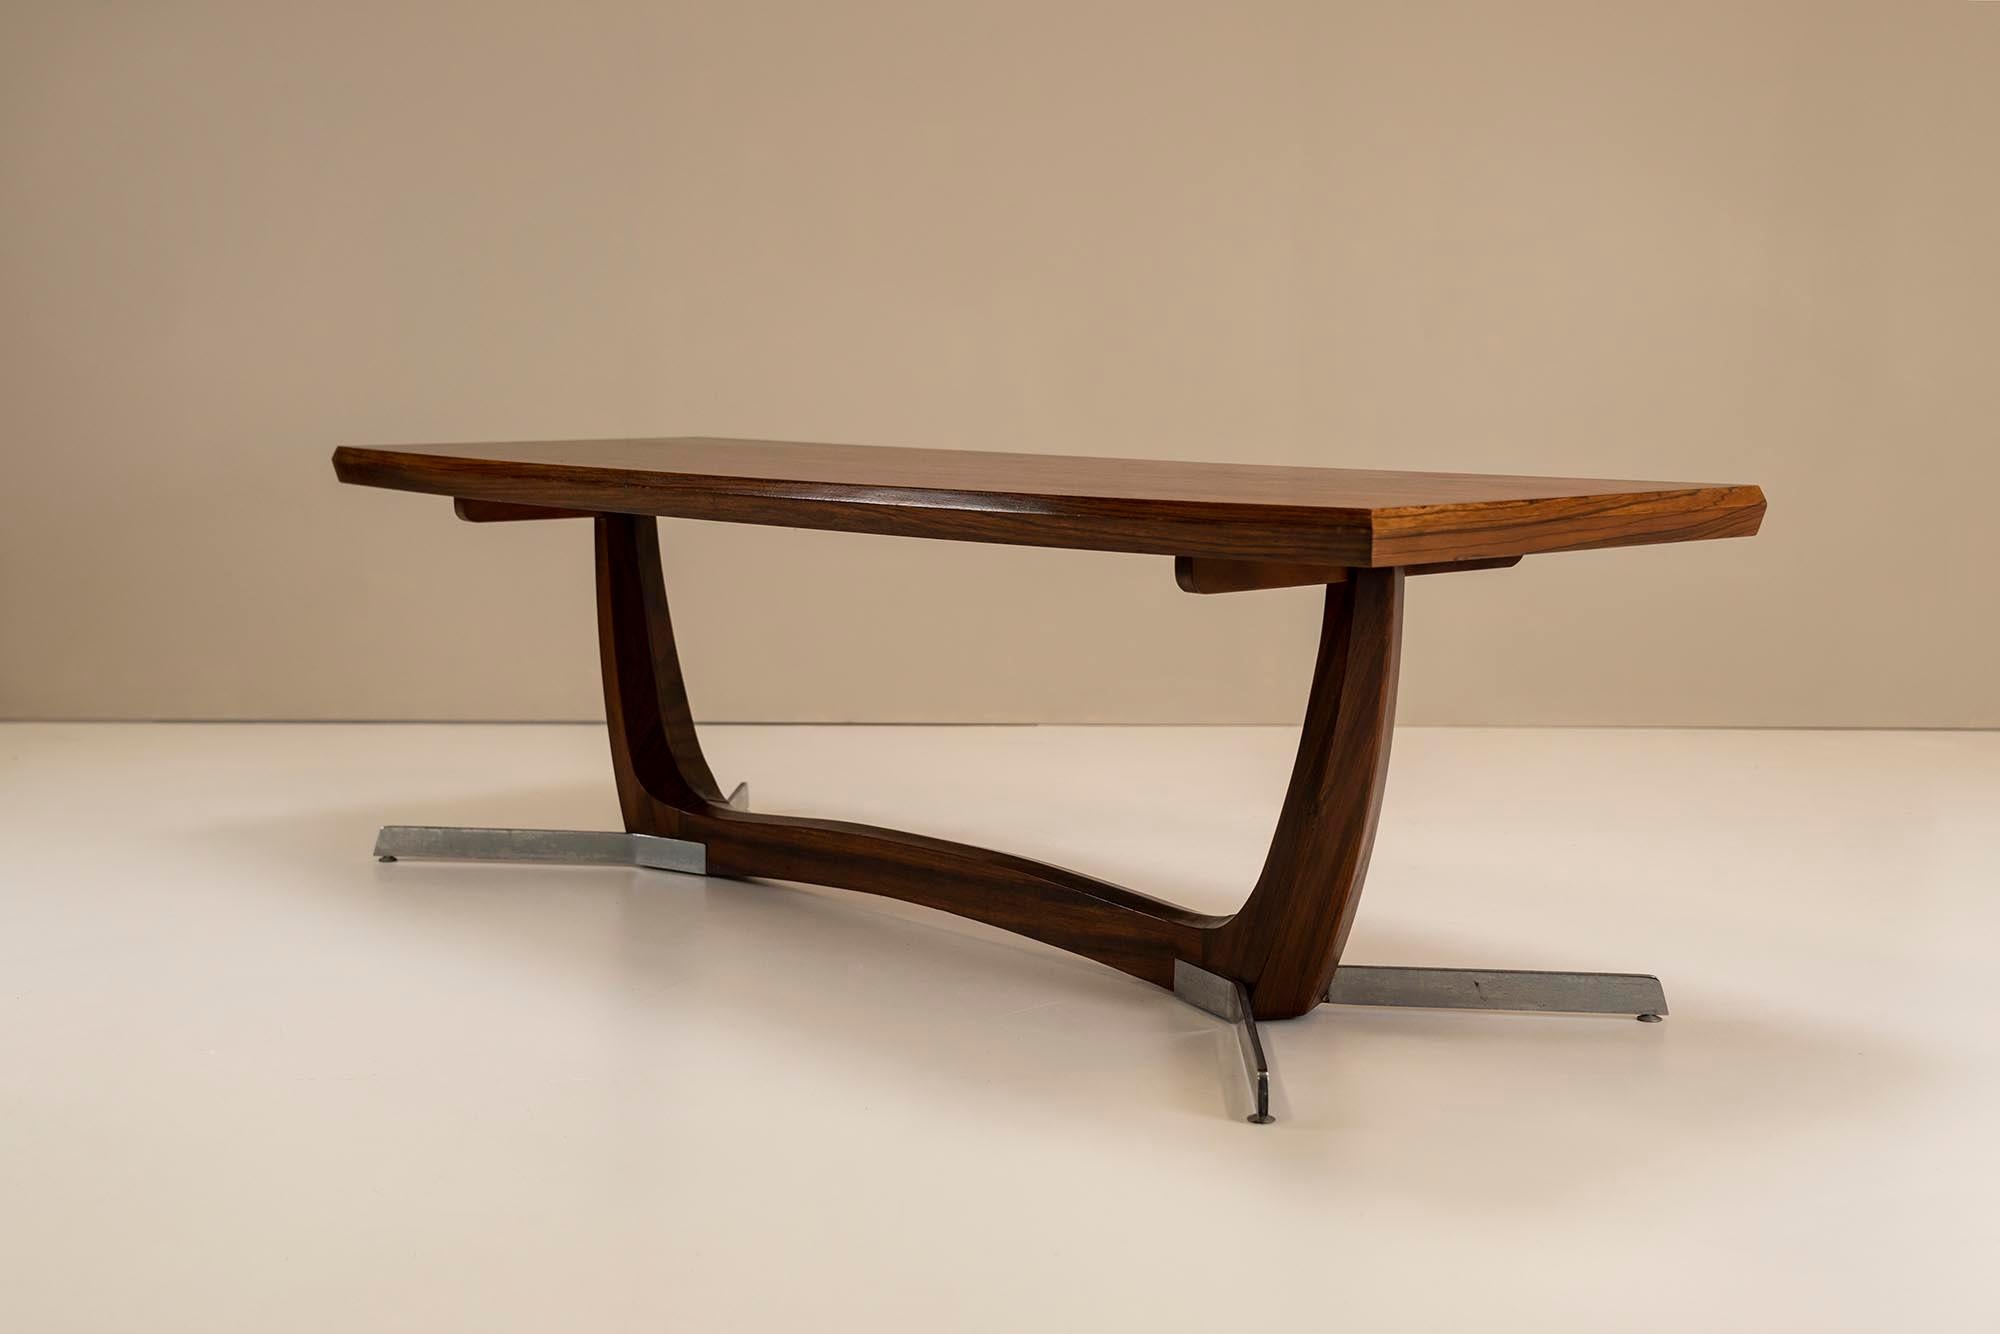 European Architectural Large Coffee Table in Rosewood Veneer and Metal, 1960s For Sale